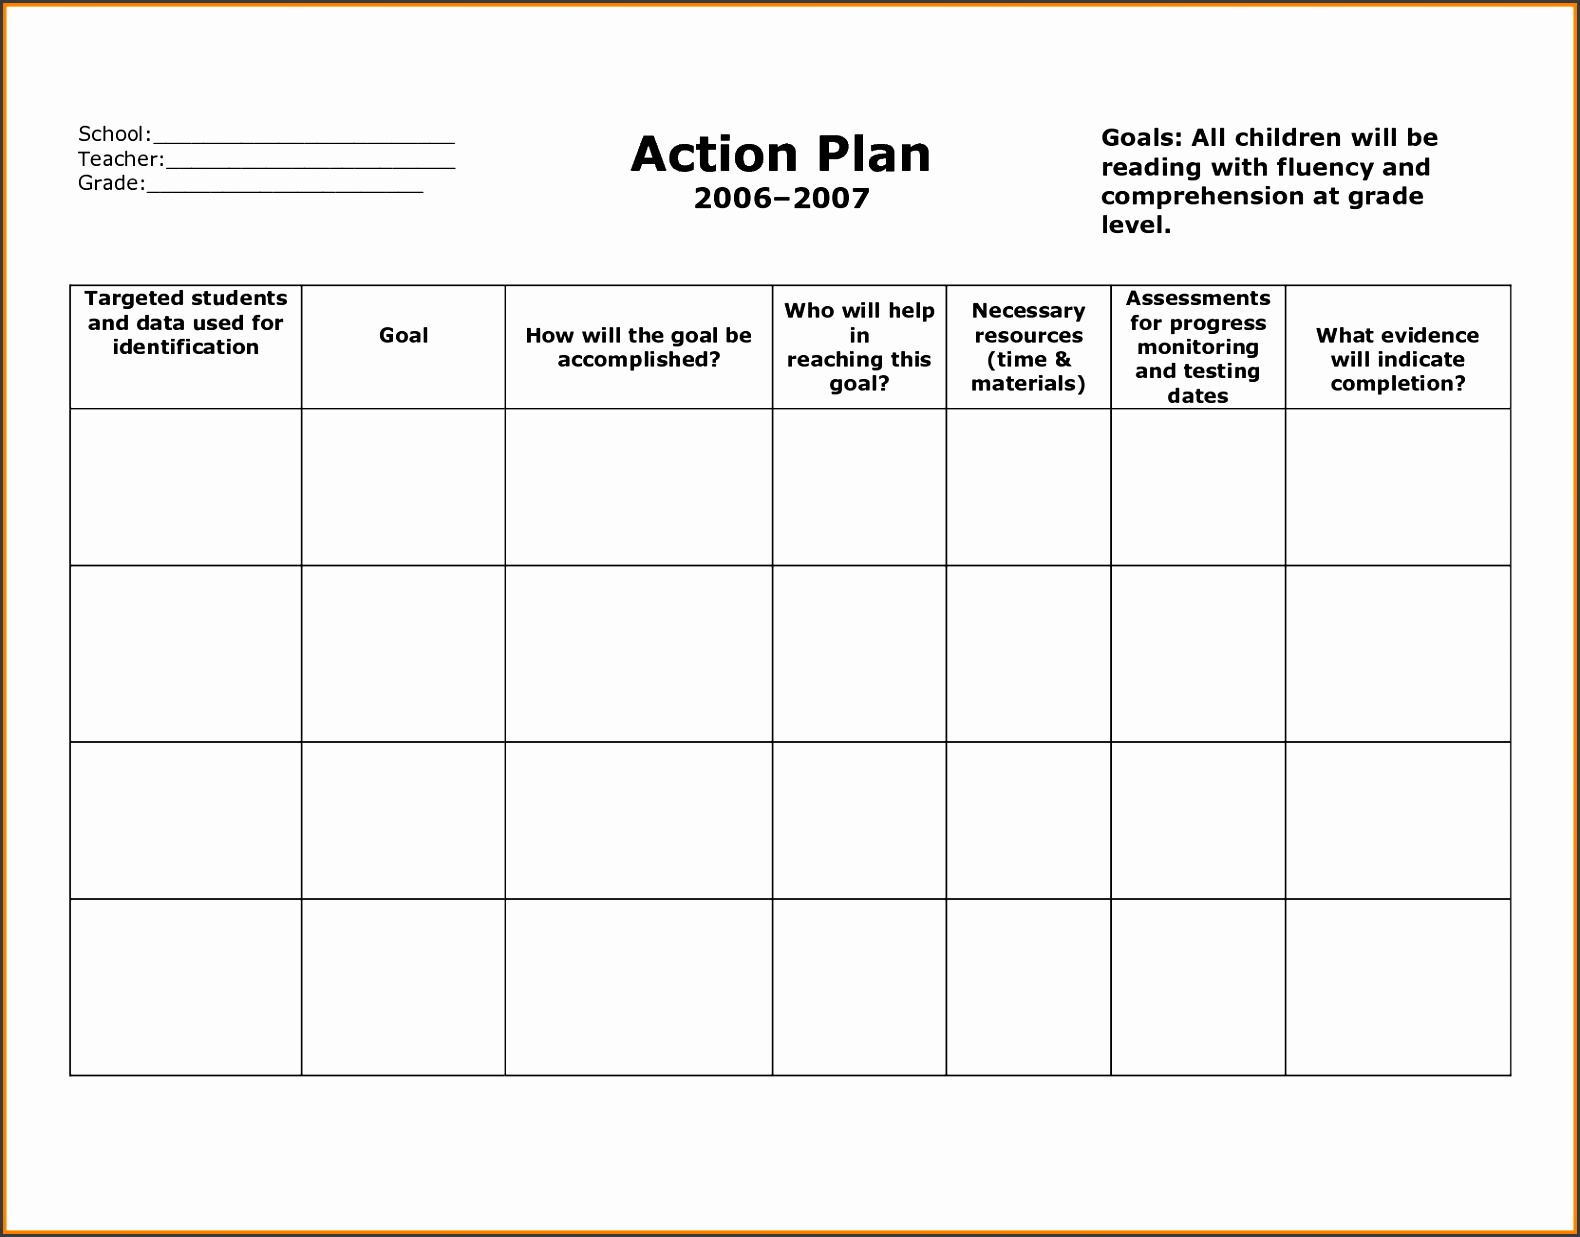 Efficient Action Plan Template Word Sample For School With Title intended for Action Plan Template Word